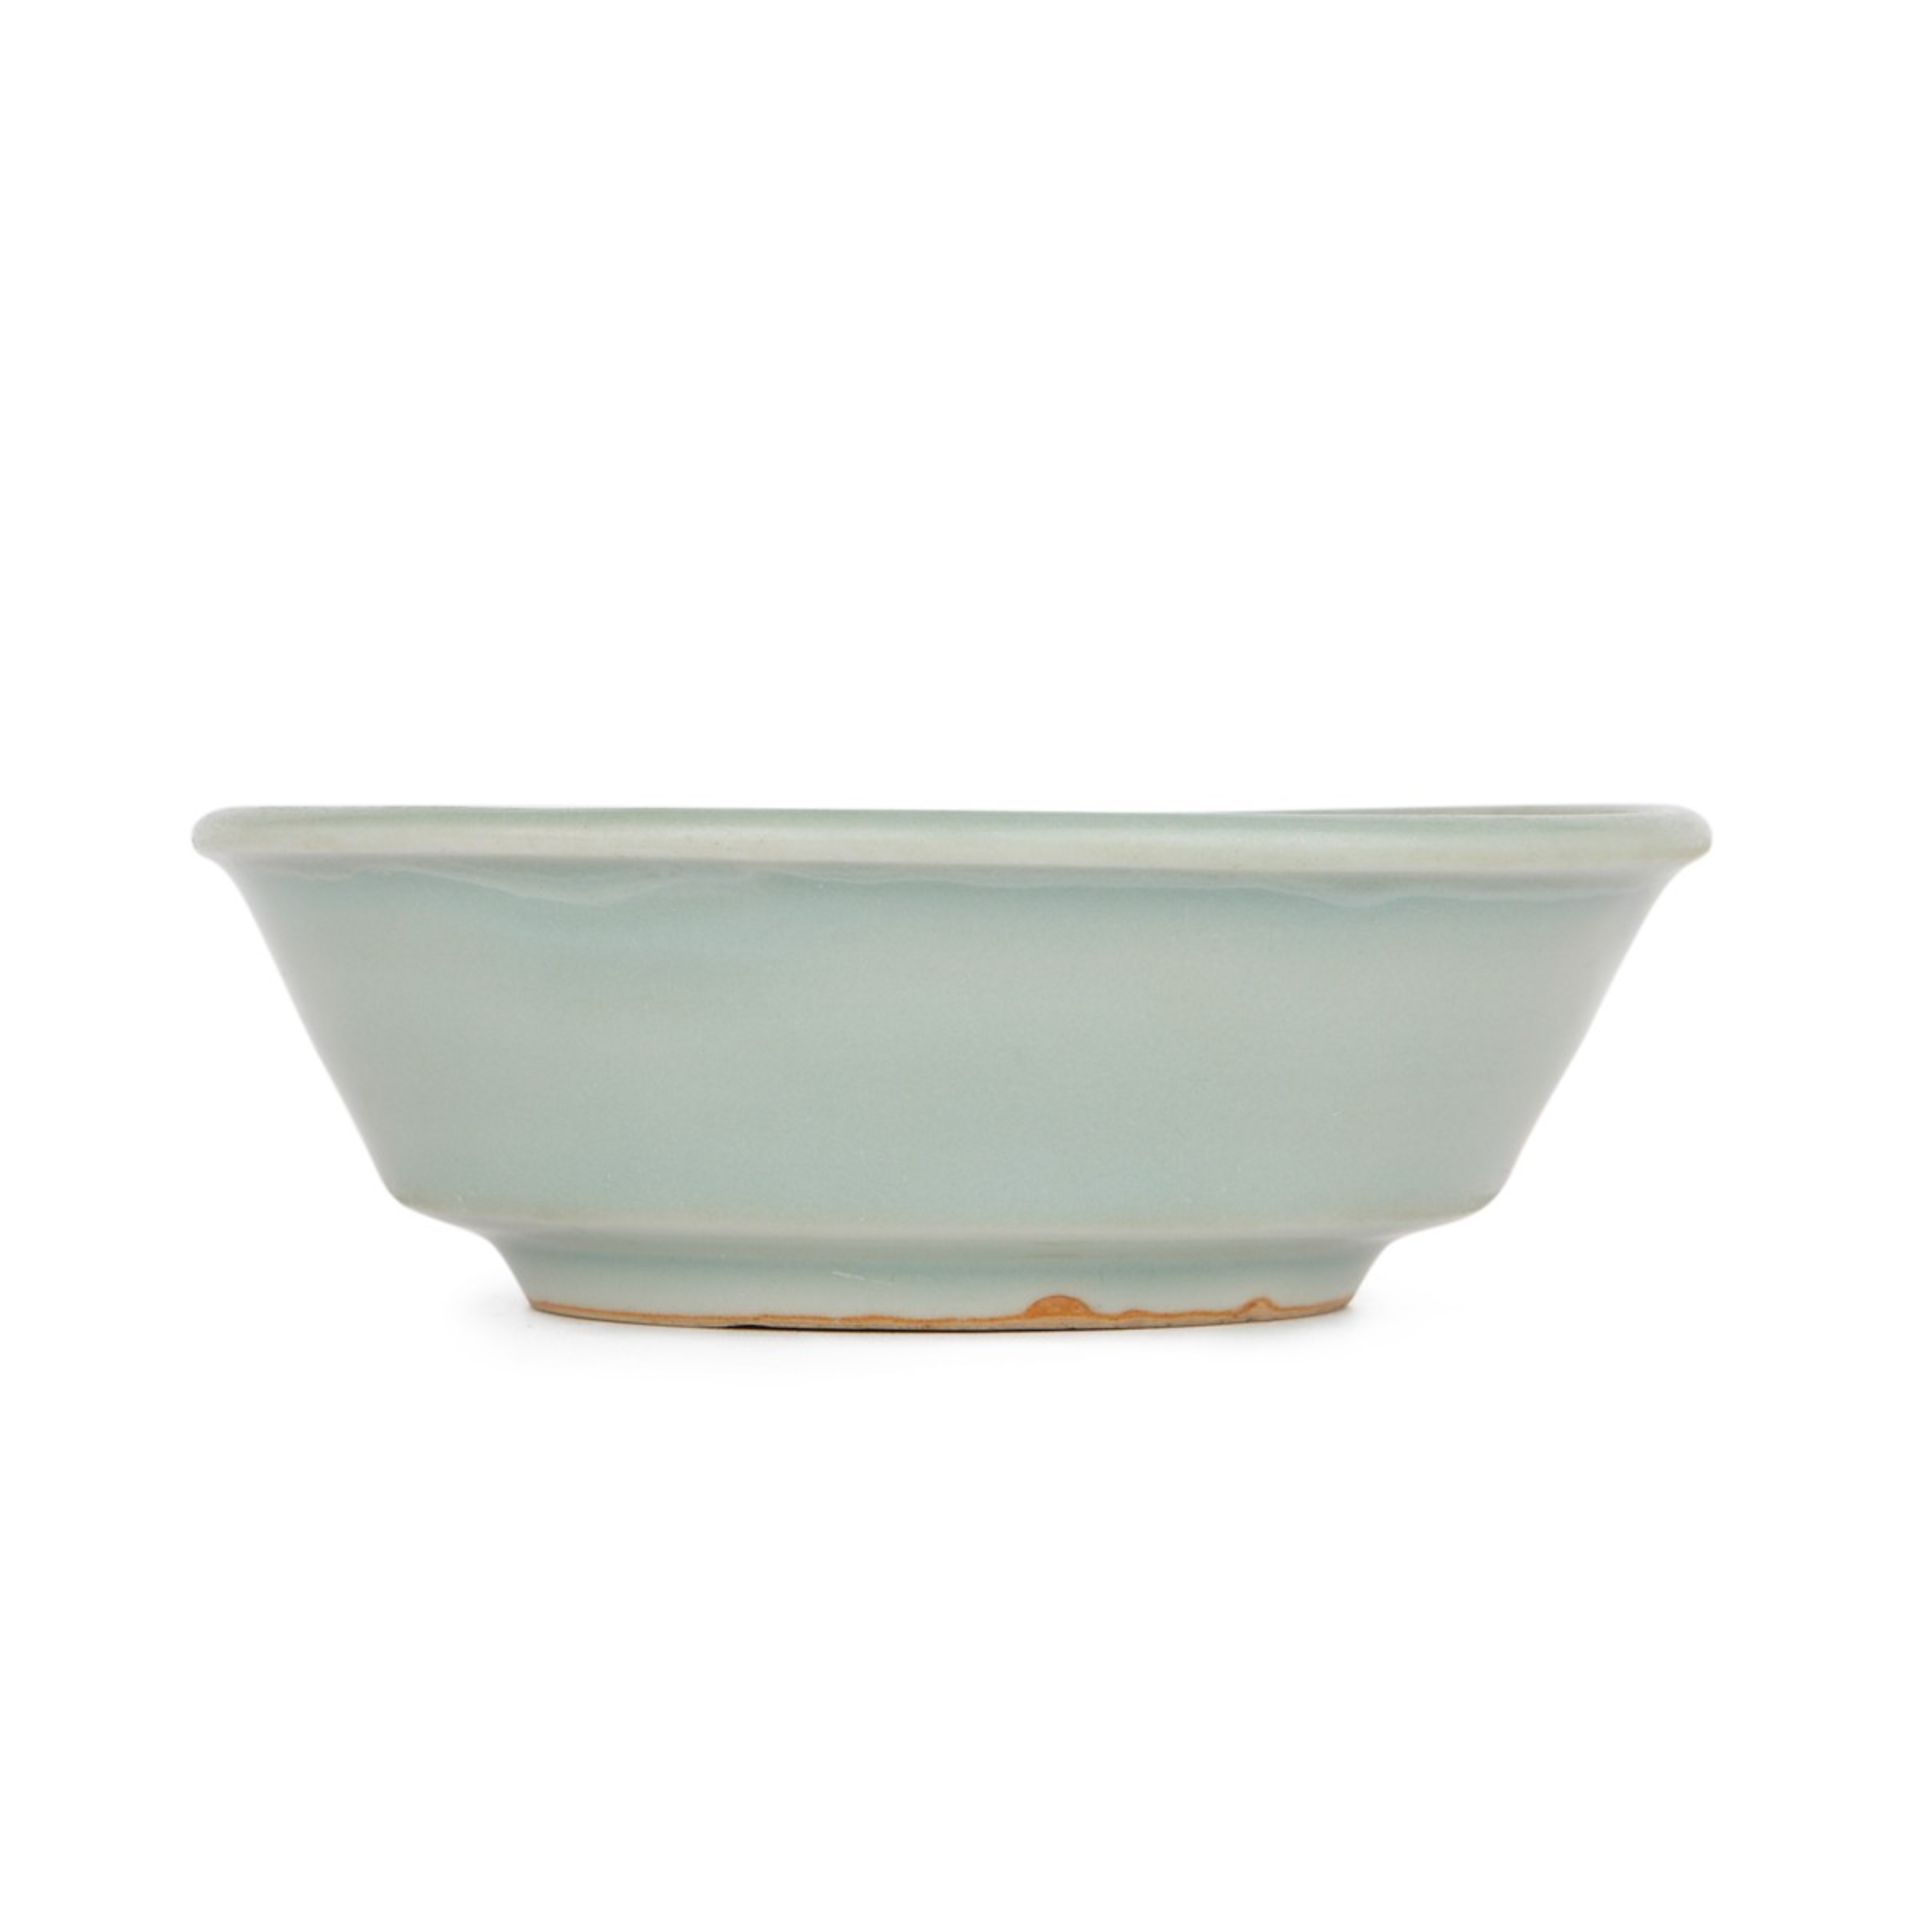 Early Chinese Celadon Porcelain Bowl - Likely Yuan - Image 8 of 9